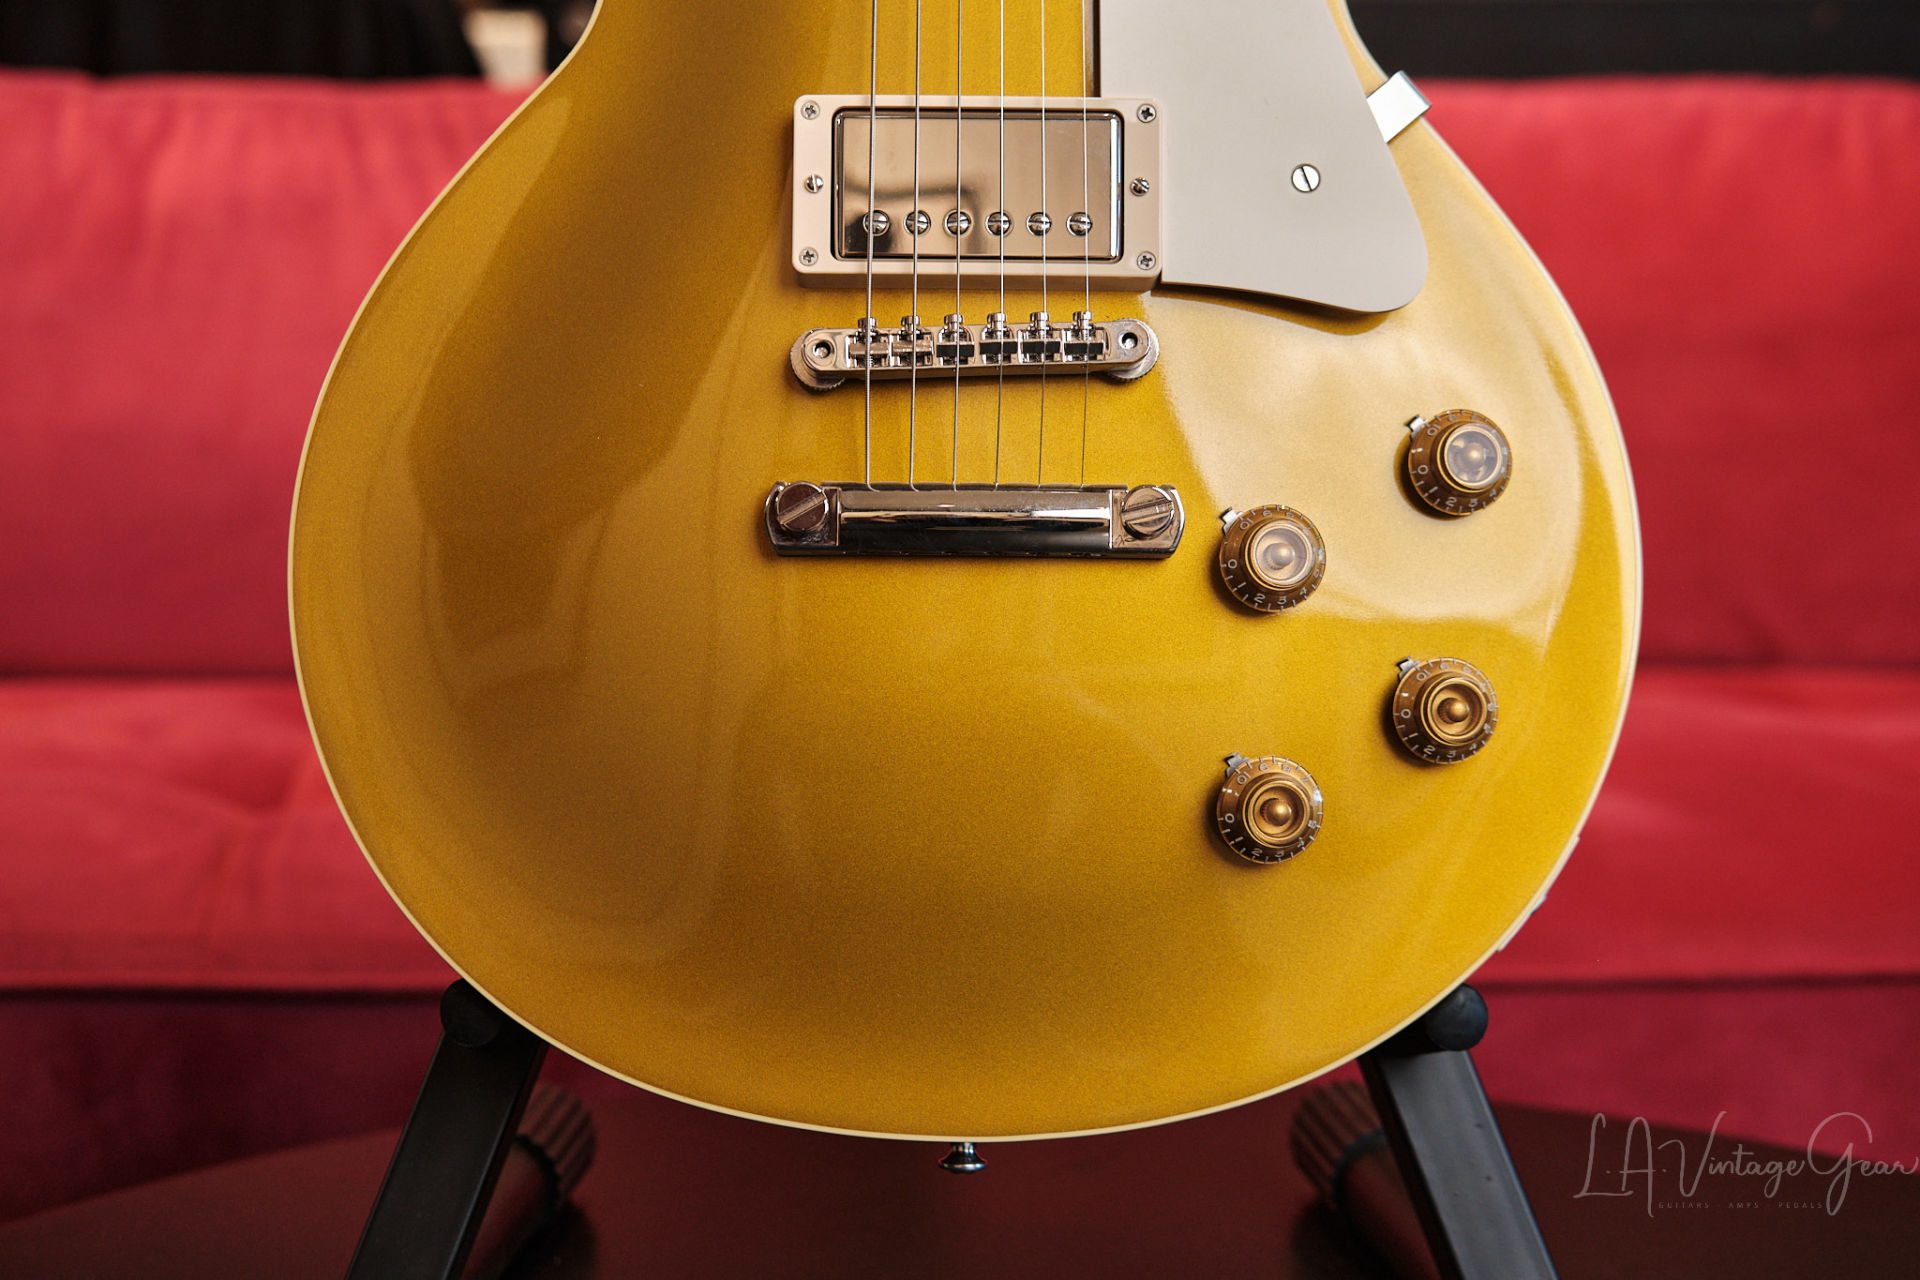 rulletrappe ecstasy nyheder Gibson '57 Reissue Les Paul Gold Top (2013) - R7 • LA Vintage Gear